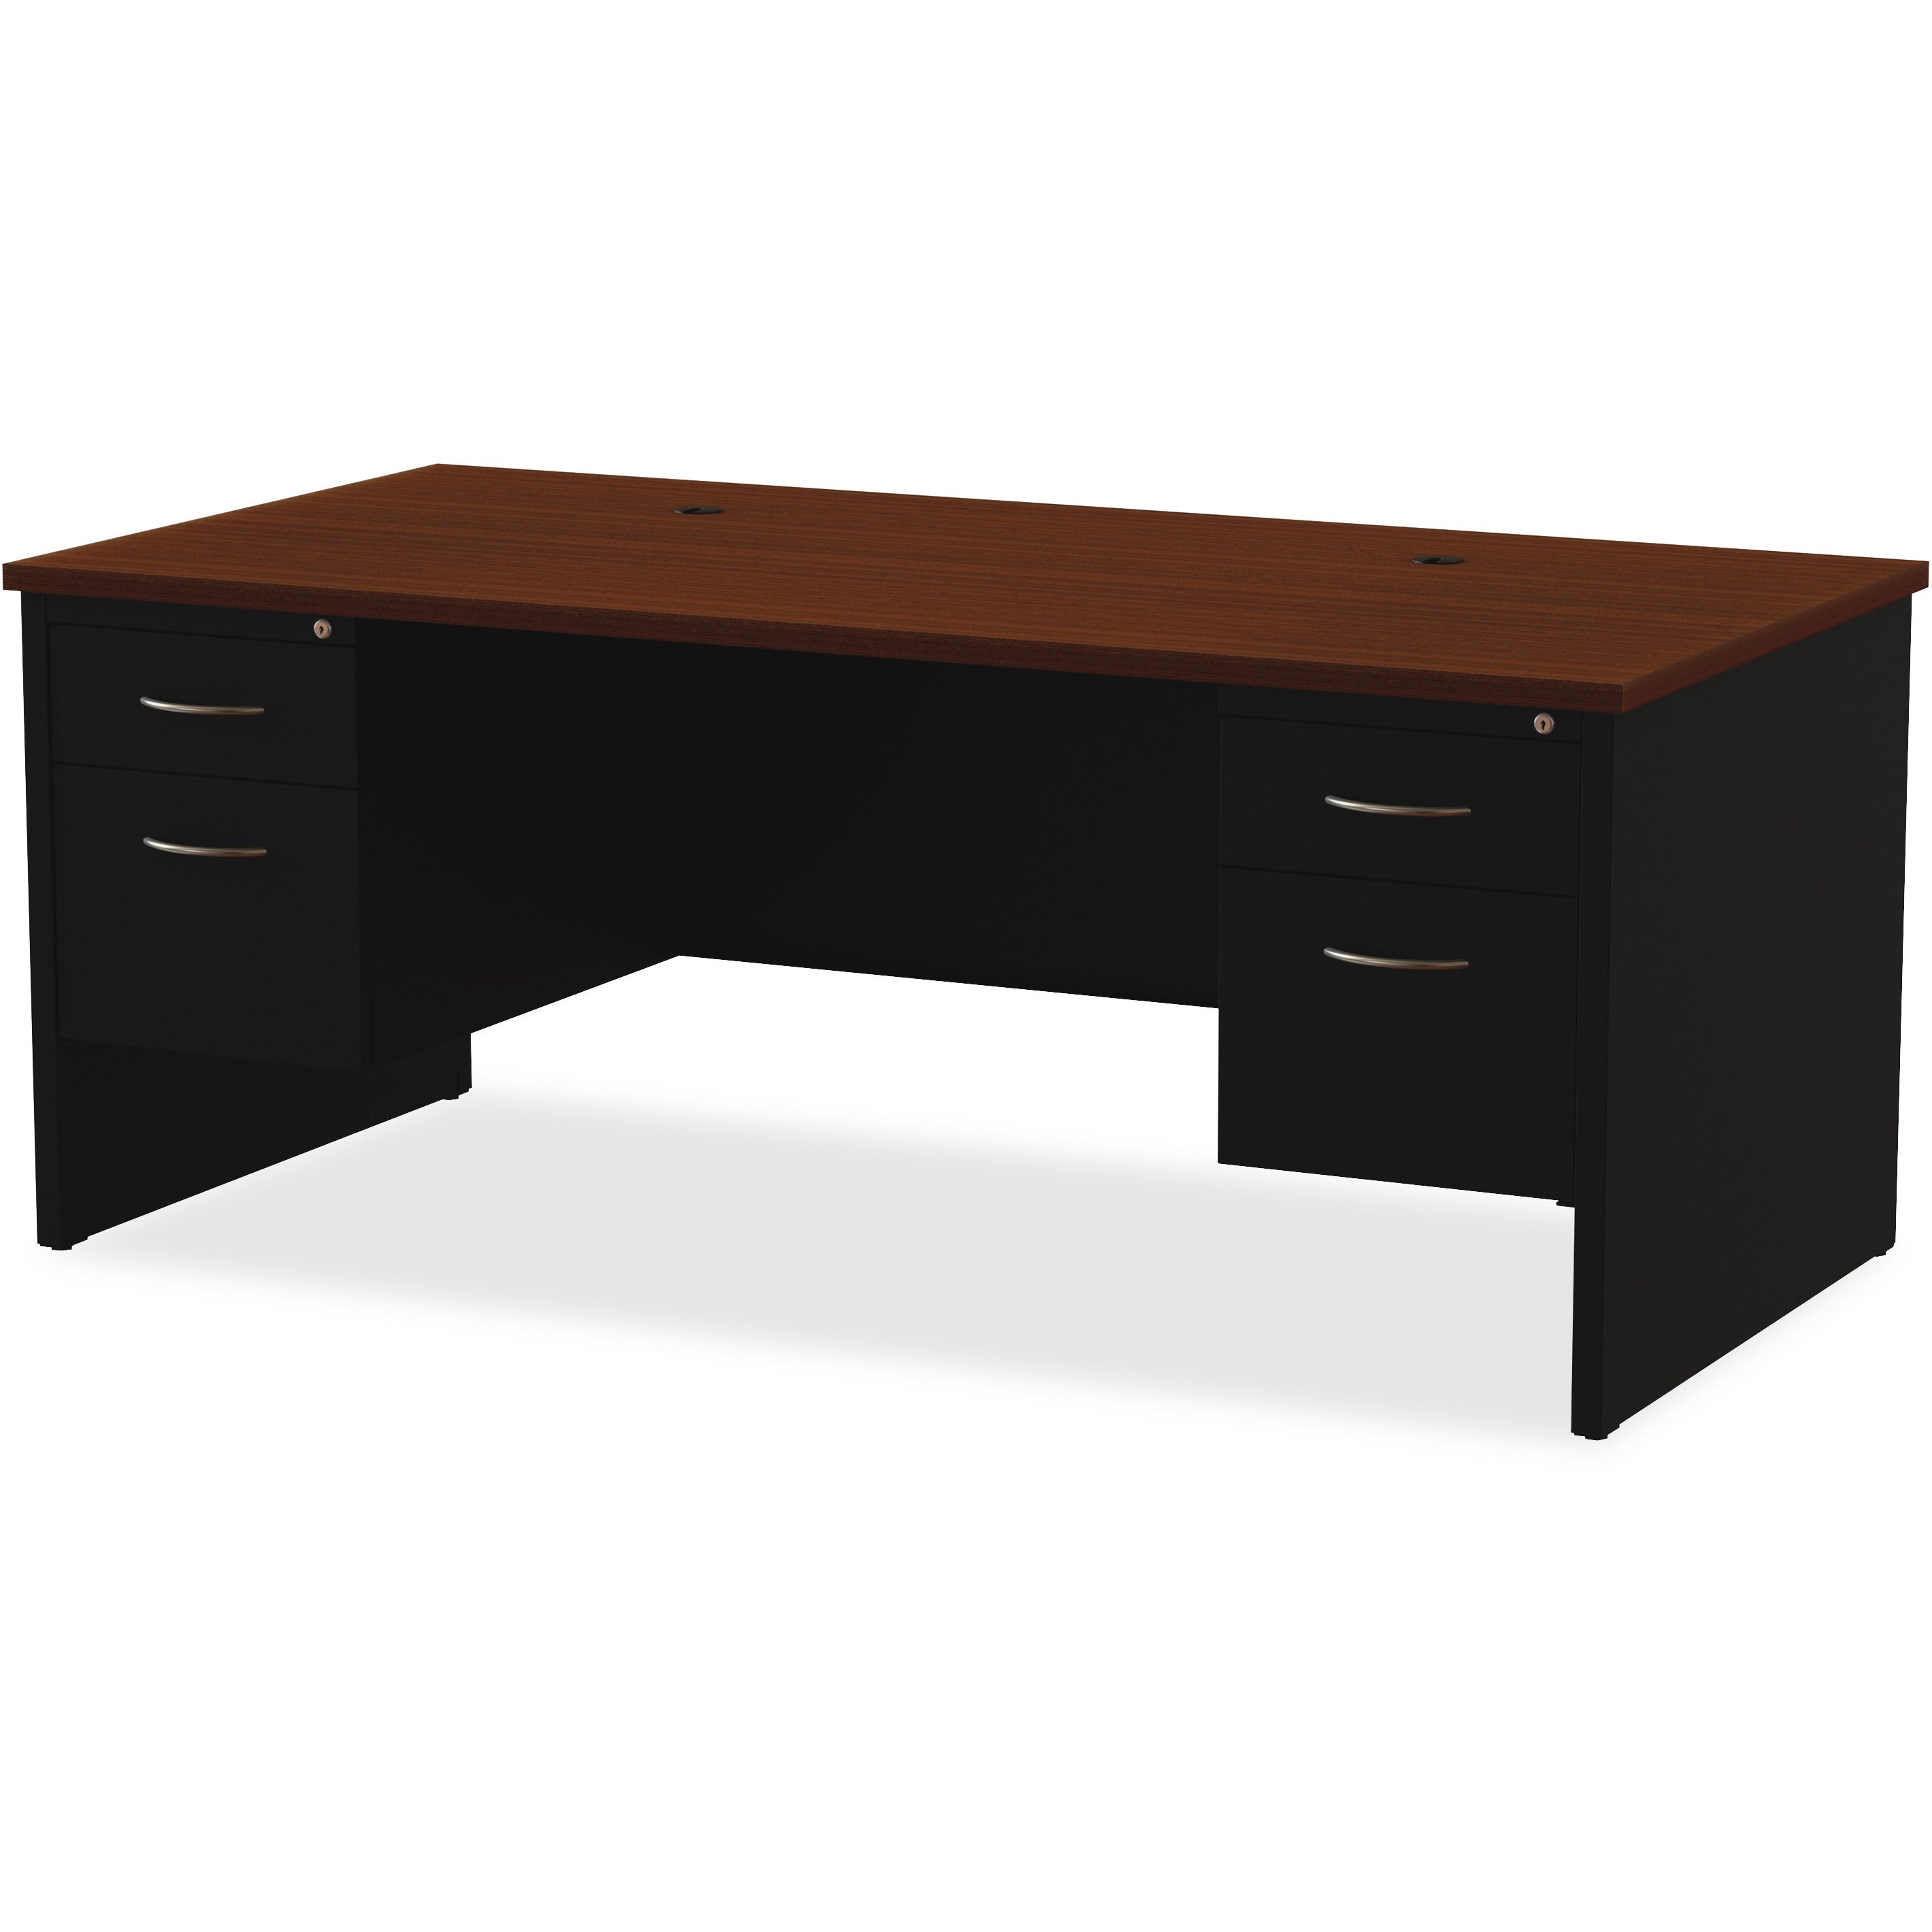 Lorell Fortress Modular Series Double-Pedestal Desk - 72" x 36" , 1.1" Top - 2 x Box, File Drawer(s) - Double Pedestal - Material: Steel - Finish: Walnut Laminate, Black - Scratch Resistant, Stain Resistant, Ball-bearing Suspension, Grommet, Handle, - 